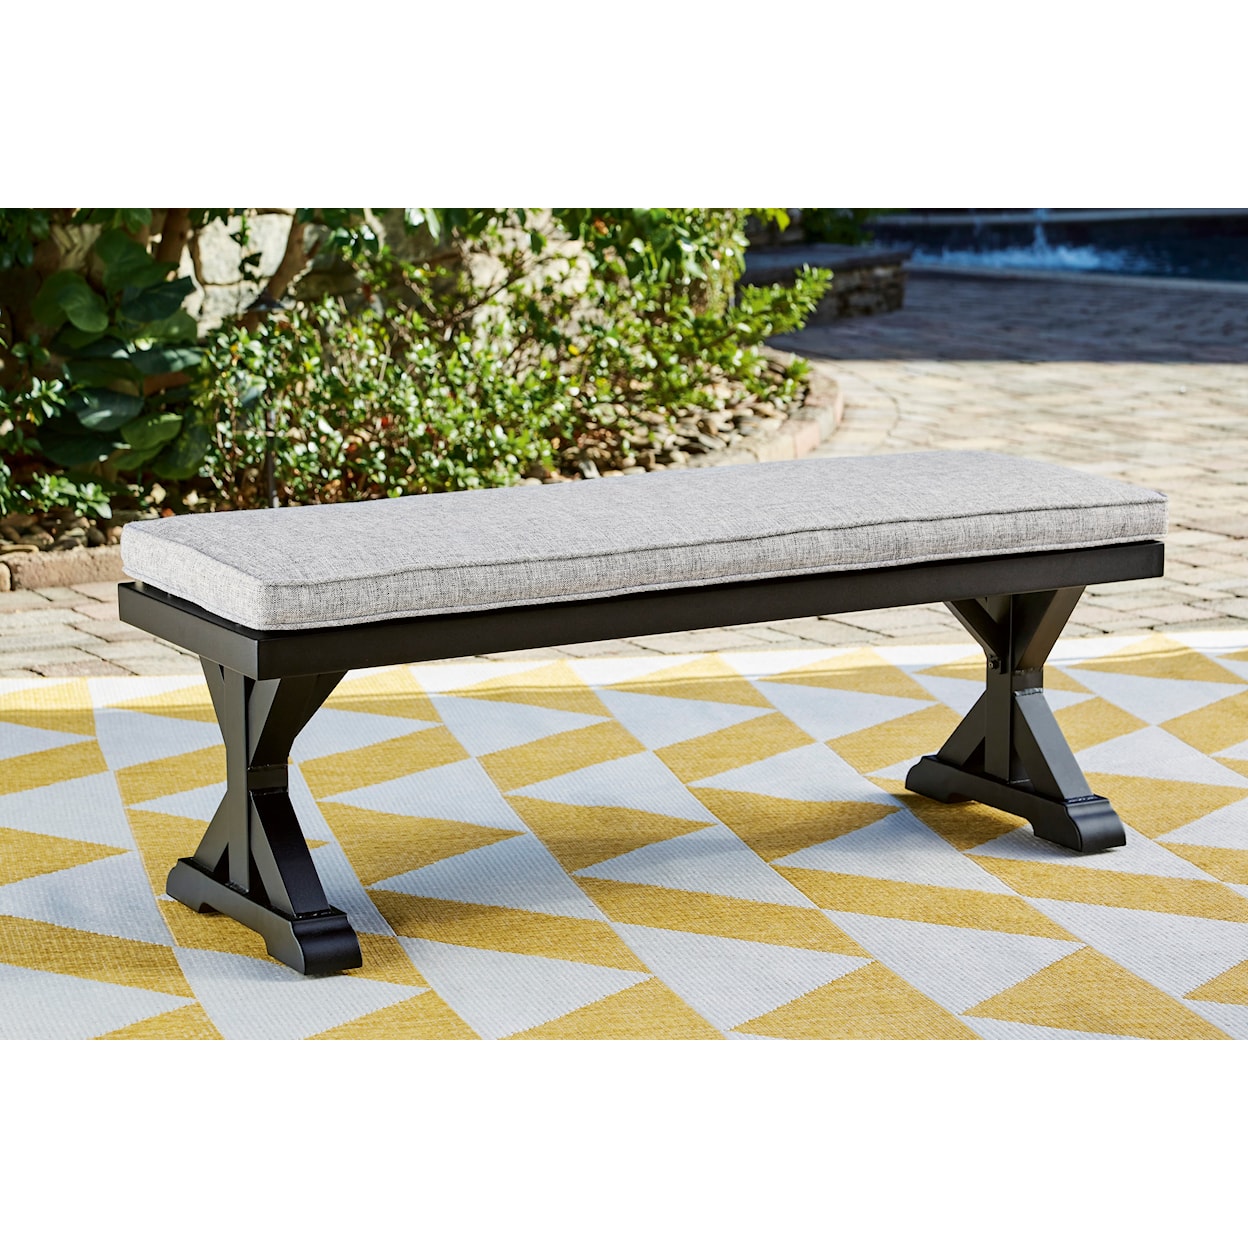 Signature Design by Ashley Beachcroft Outdoor Bench with Cushion